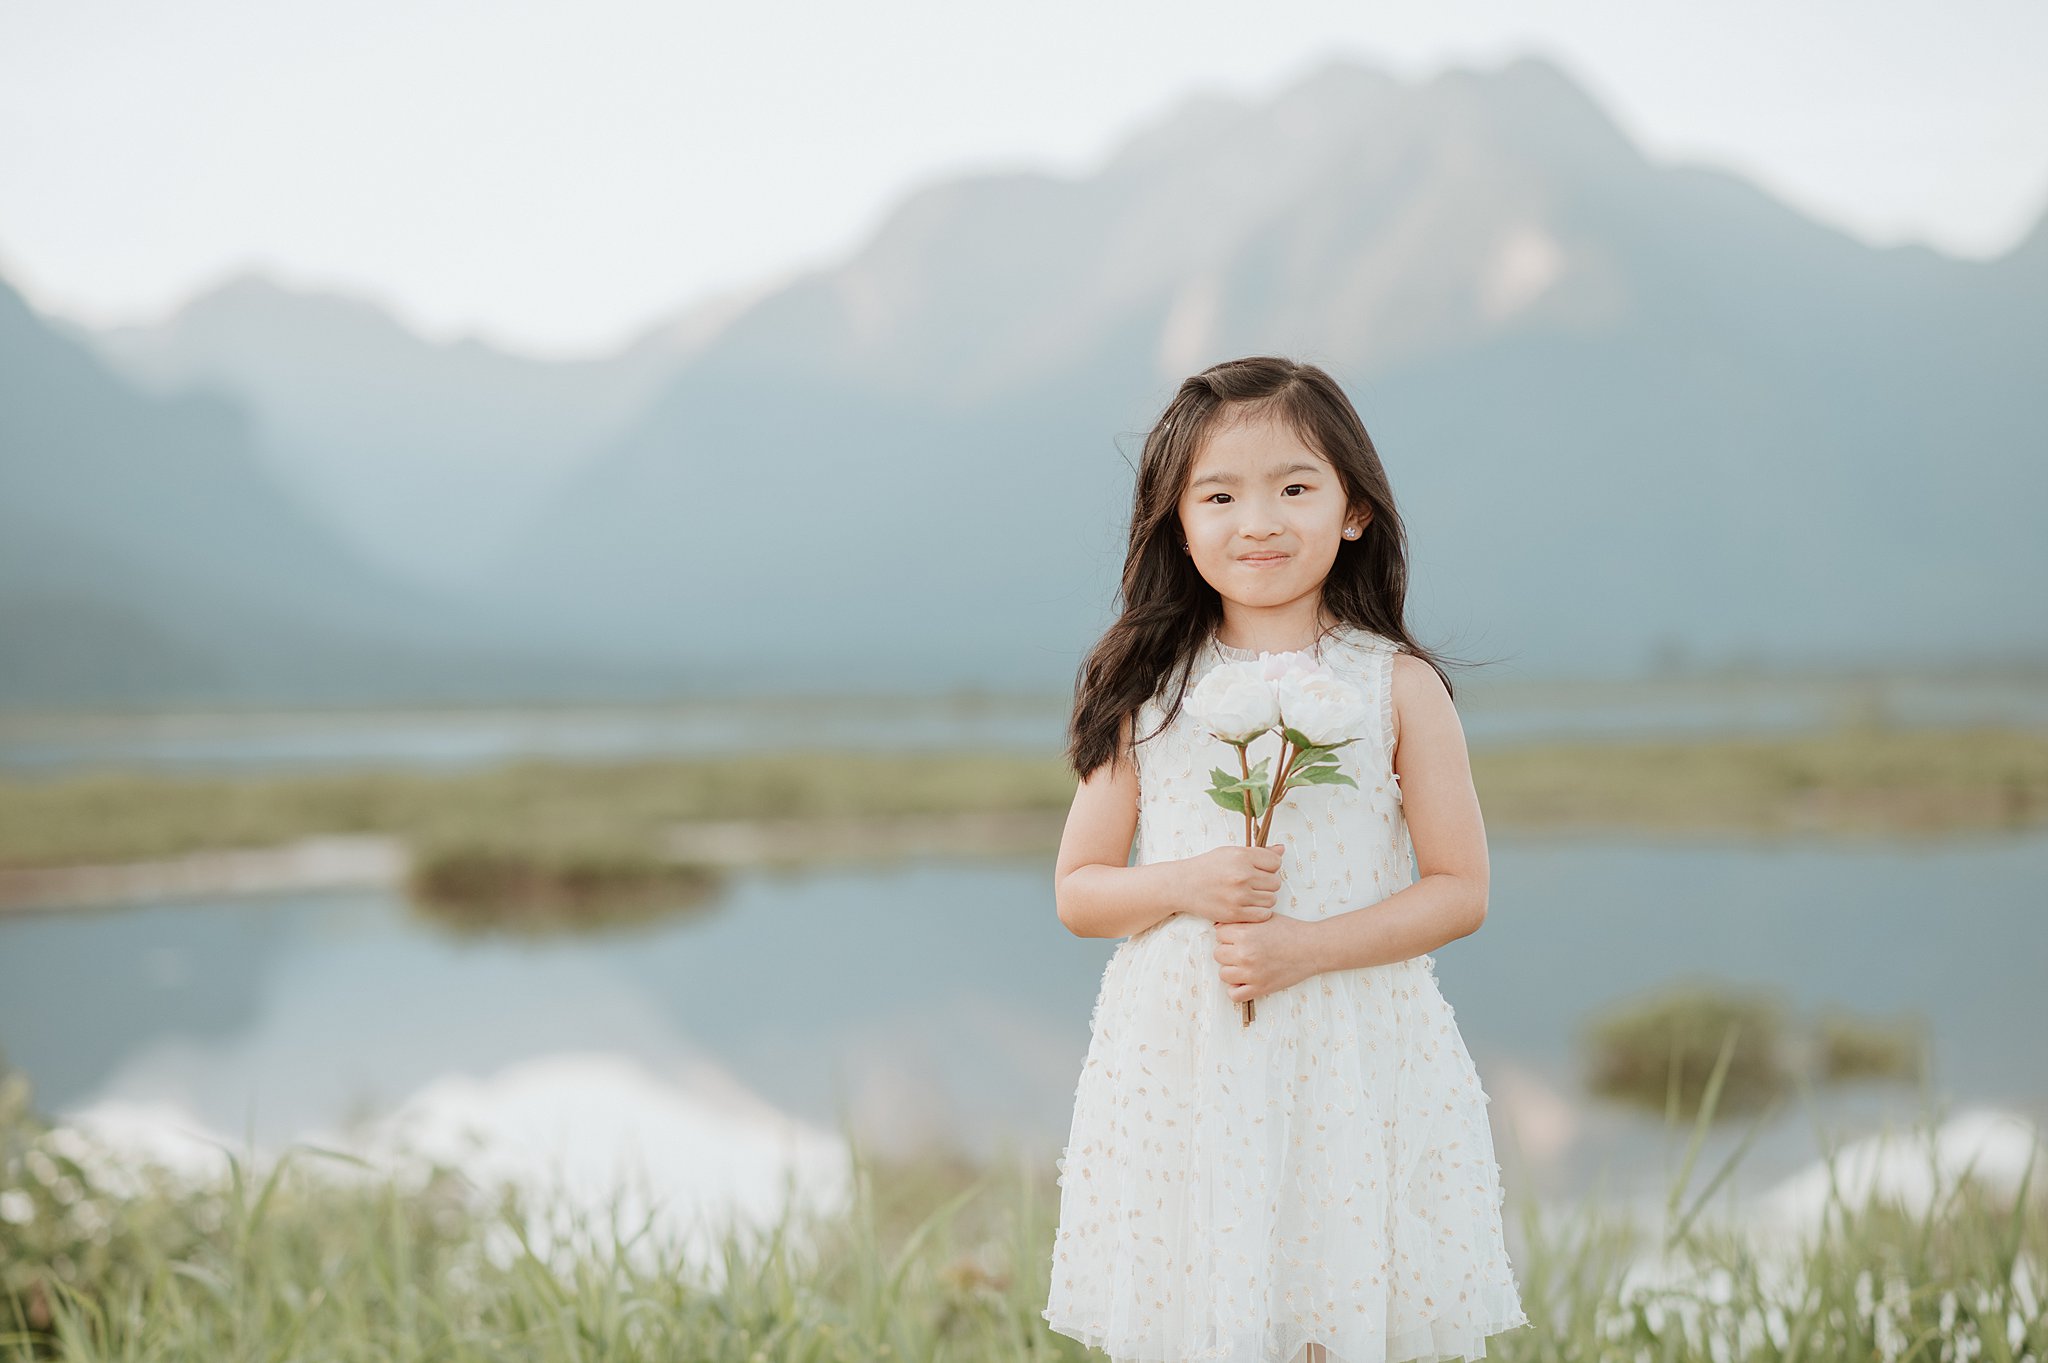 A young girl in a white dress stands by a mountain lake holding two white roses before visiting vancouver toy stores